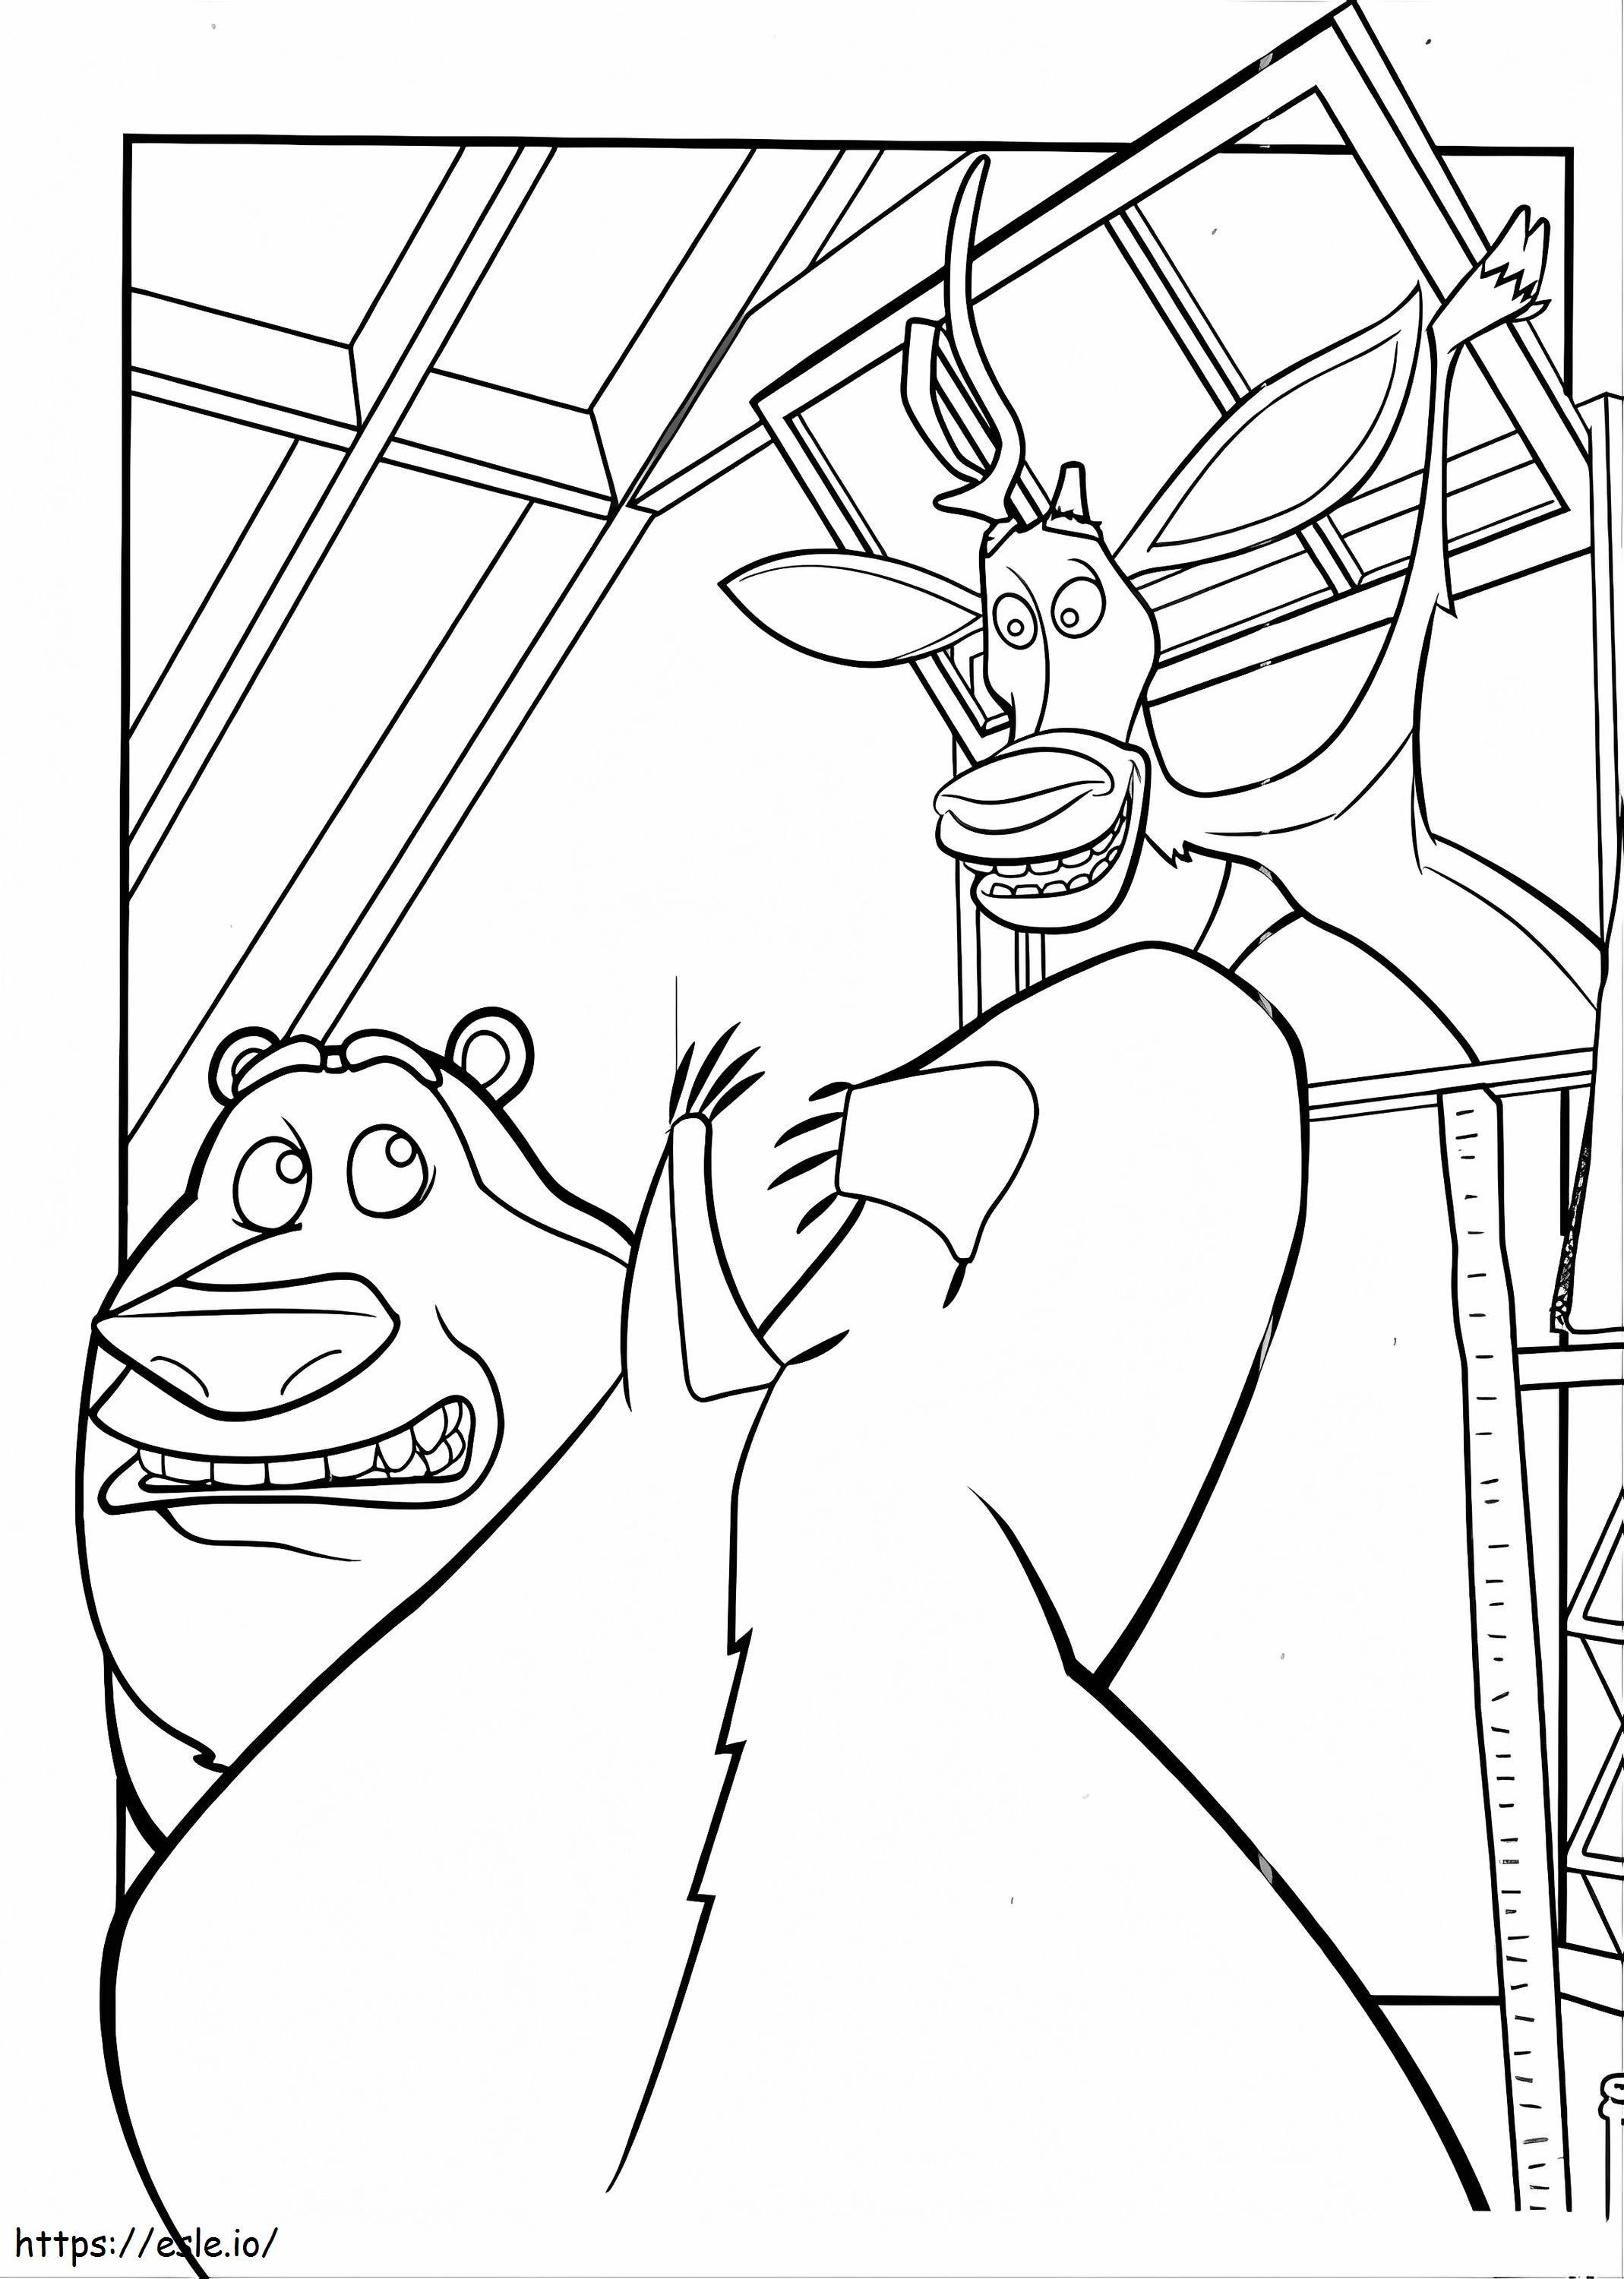 Elliot And Boog From Open Season coloring page